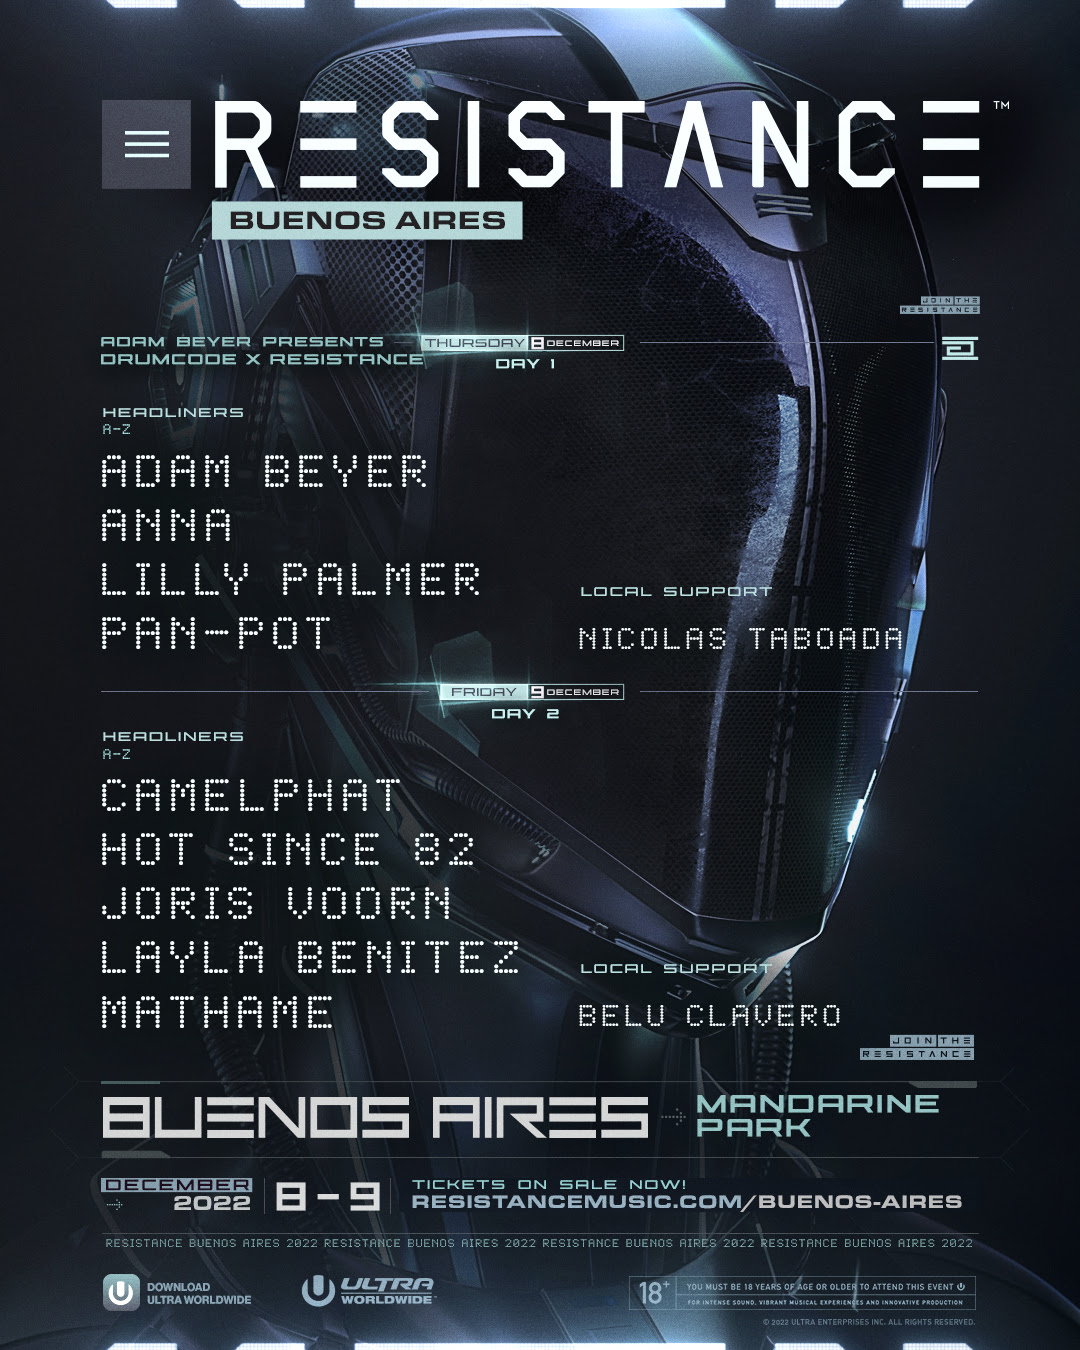 RESISTANCE Buenos Aires